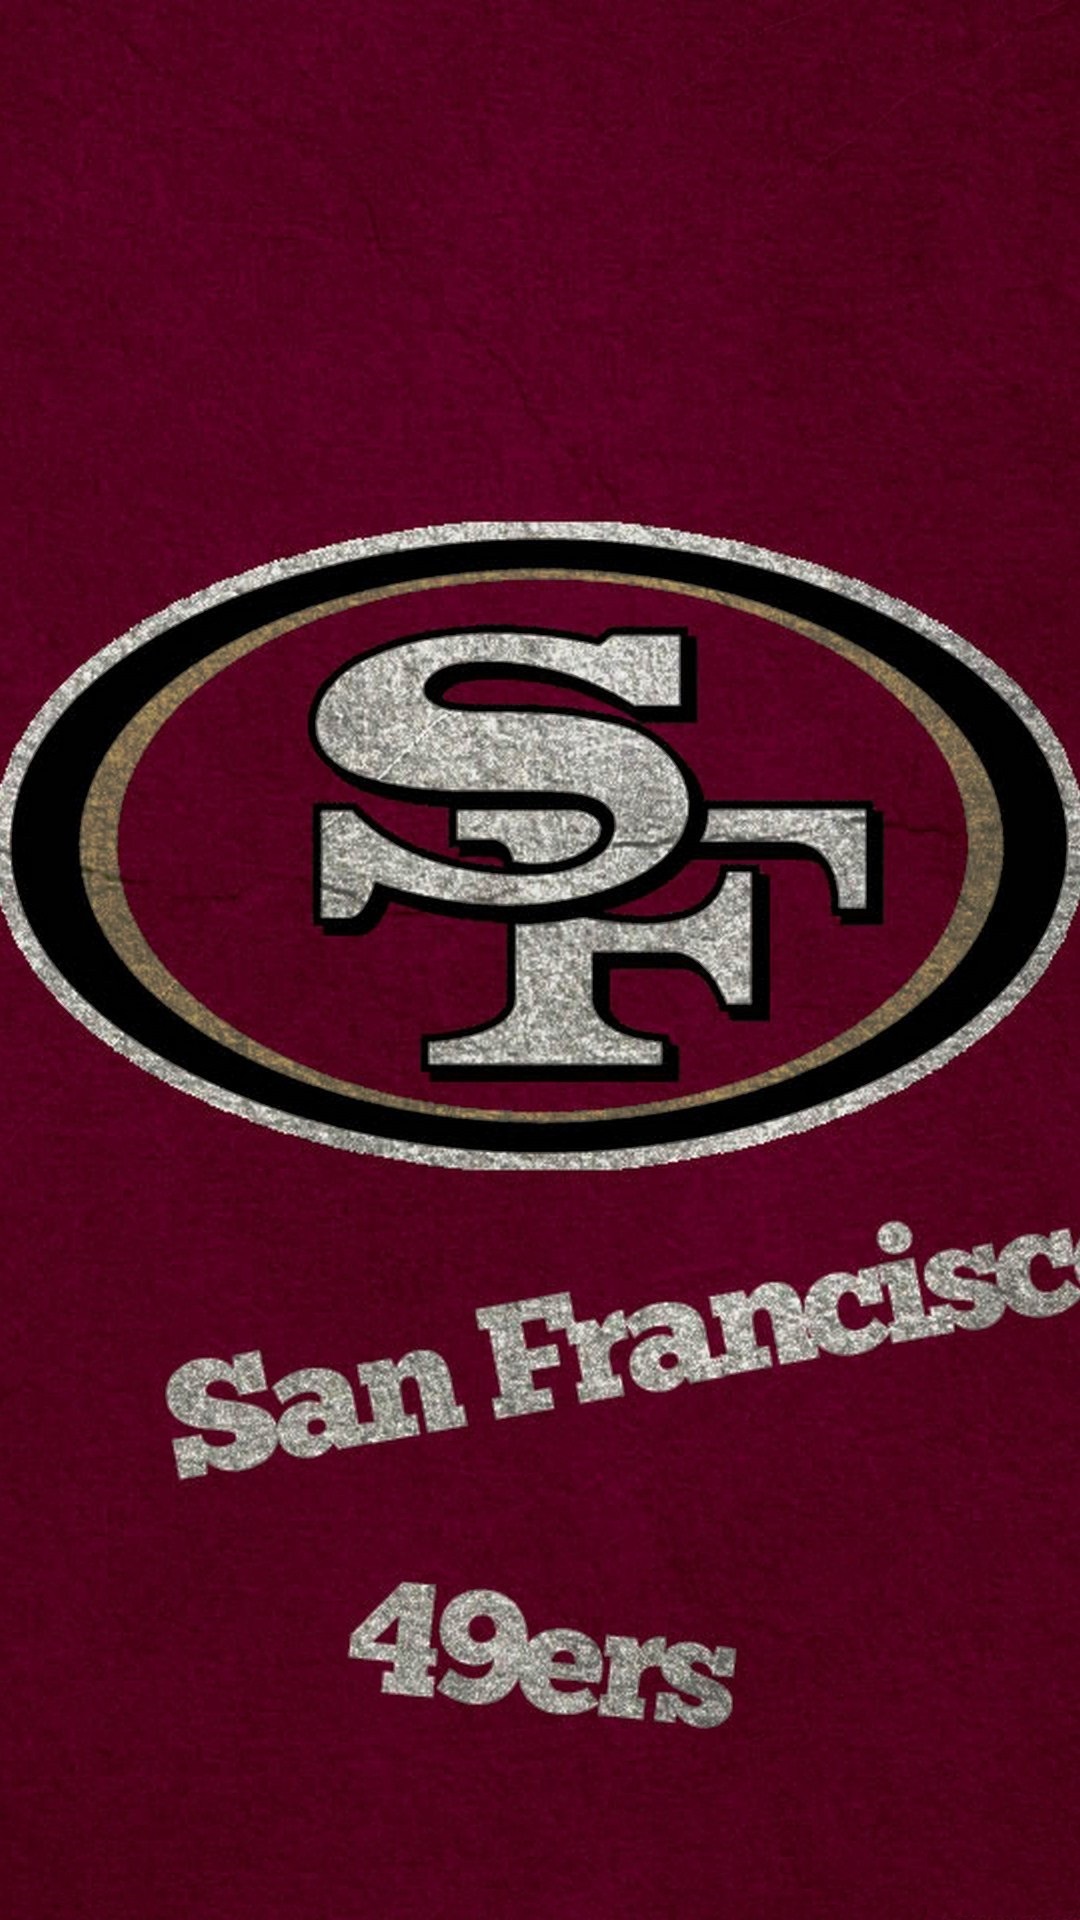 San Francisco 49ers iPhone 7 Plus Wallpaper With high-resolution 1080X1920 pixel. You can use this wallpaper for your Mac or Windows Desktop Background, iPhone, Android or Tablet and another Smartphone device